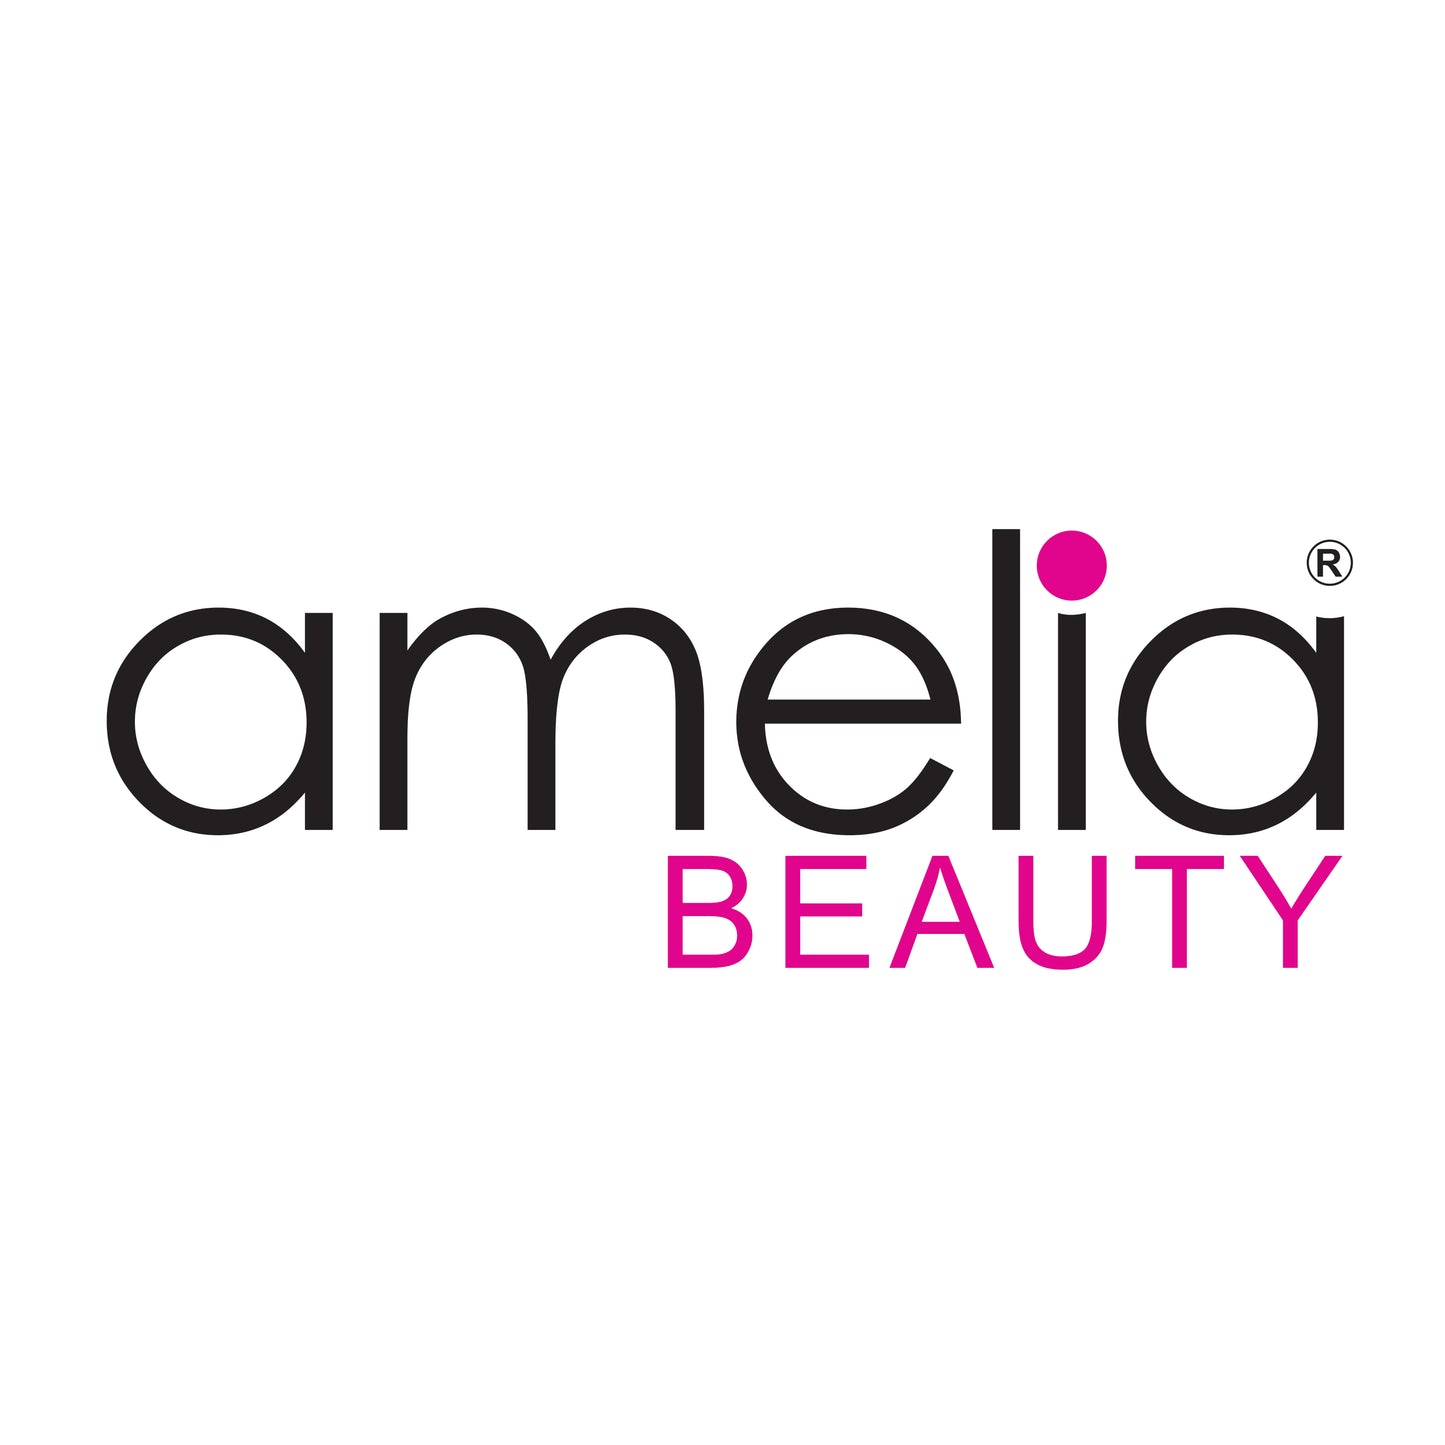 Amelia Beauty Products 8 Large Smooth Shiny Center Elastic Hair Coils, 2. 5in Diameter Thick Spiral Hair Ties, Gentle on Hair, Strong Hold and Minimizes Dents and Creases, Brown